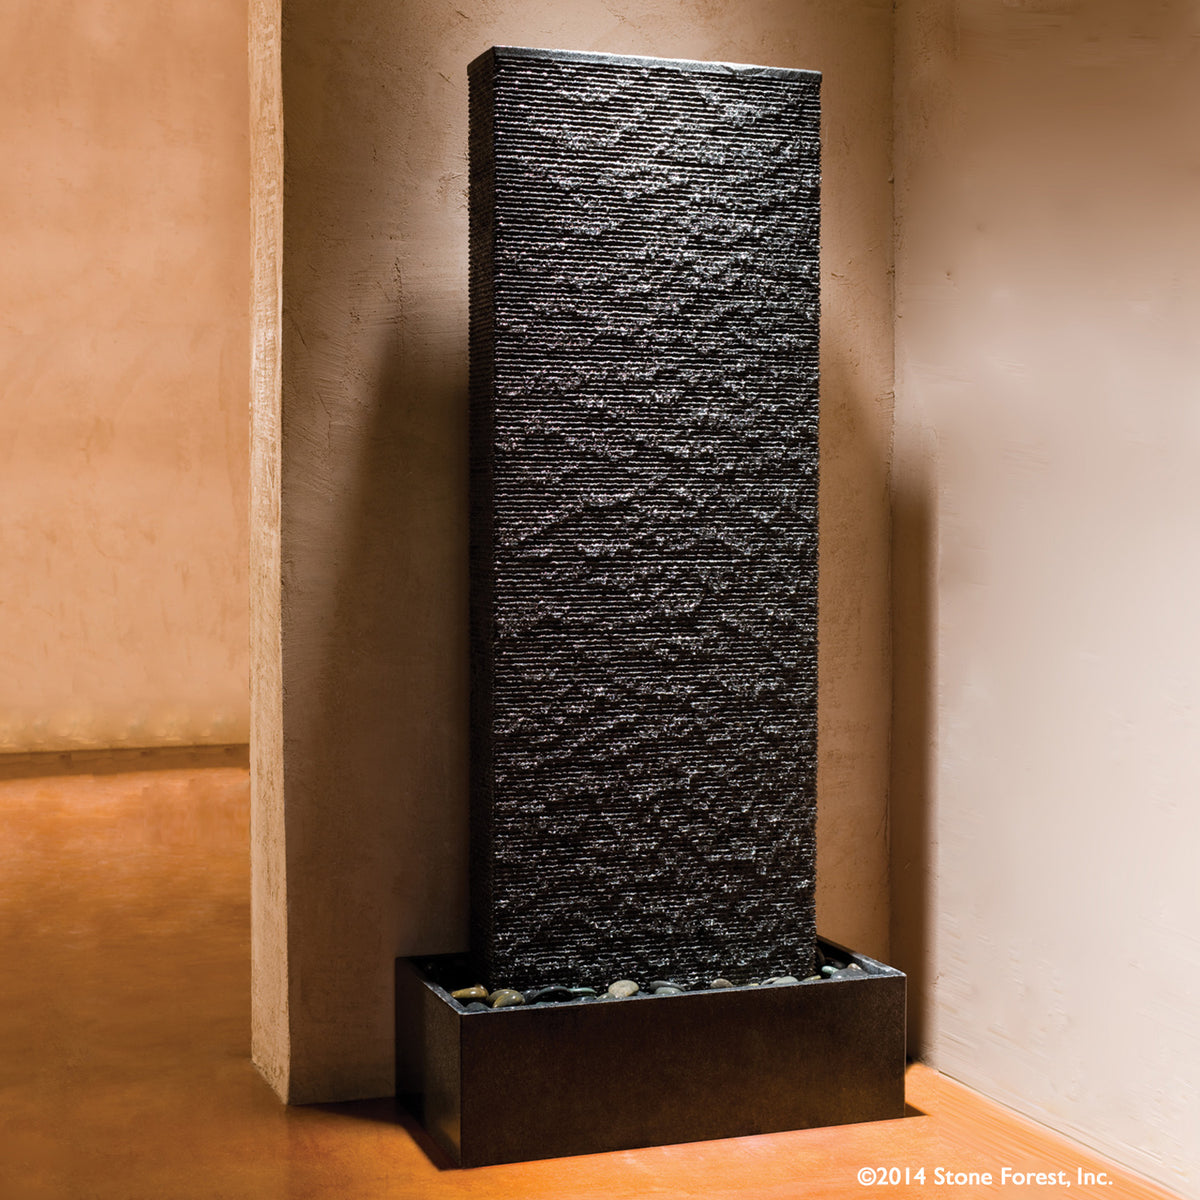 Stone Forest Ribbed Waterwall indoor fountain carved from grey granite. image 1 of 1